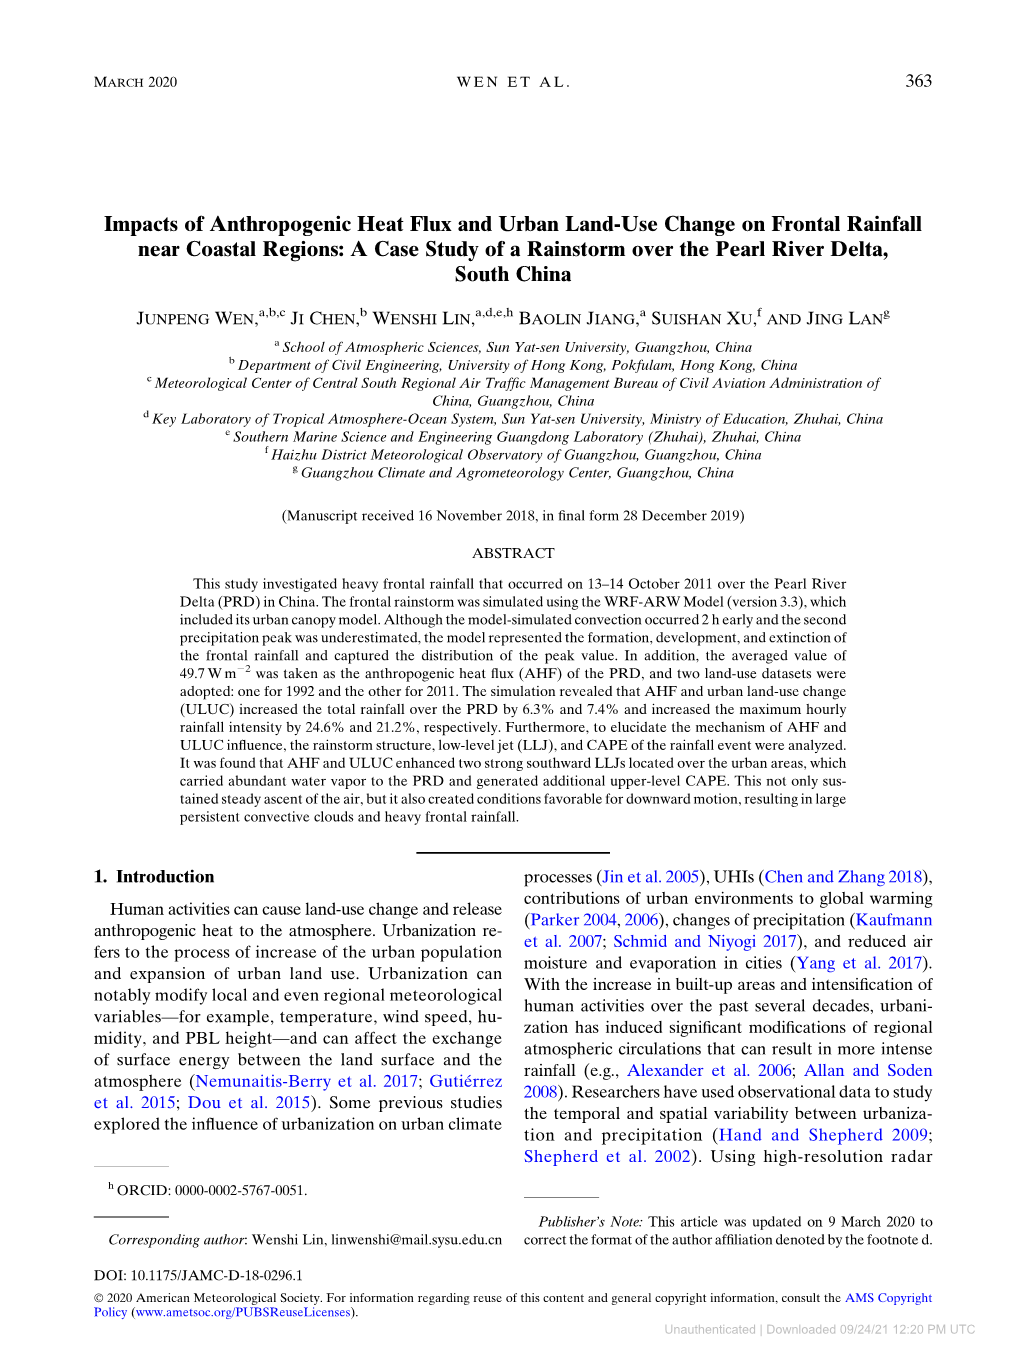 Impacts of Anthropogenic Heat Flux and Urban Land-Use Change On